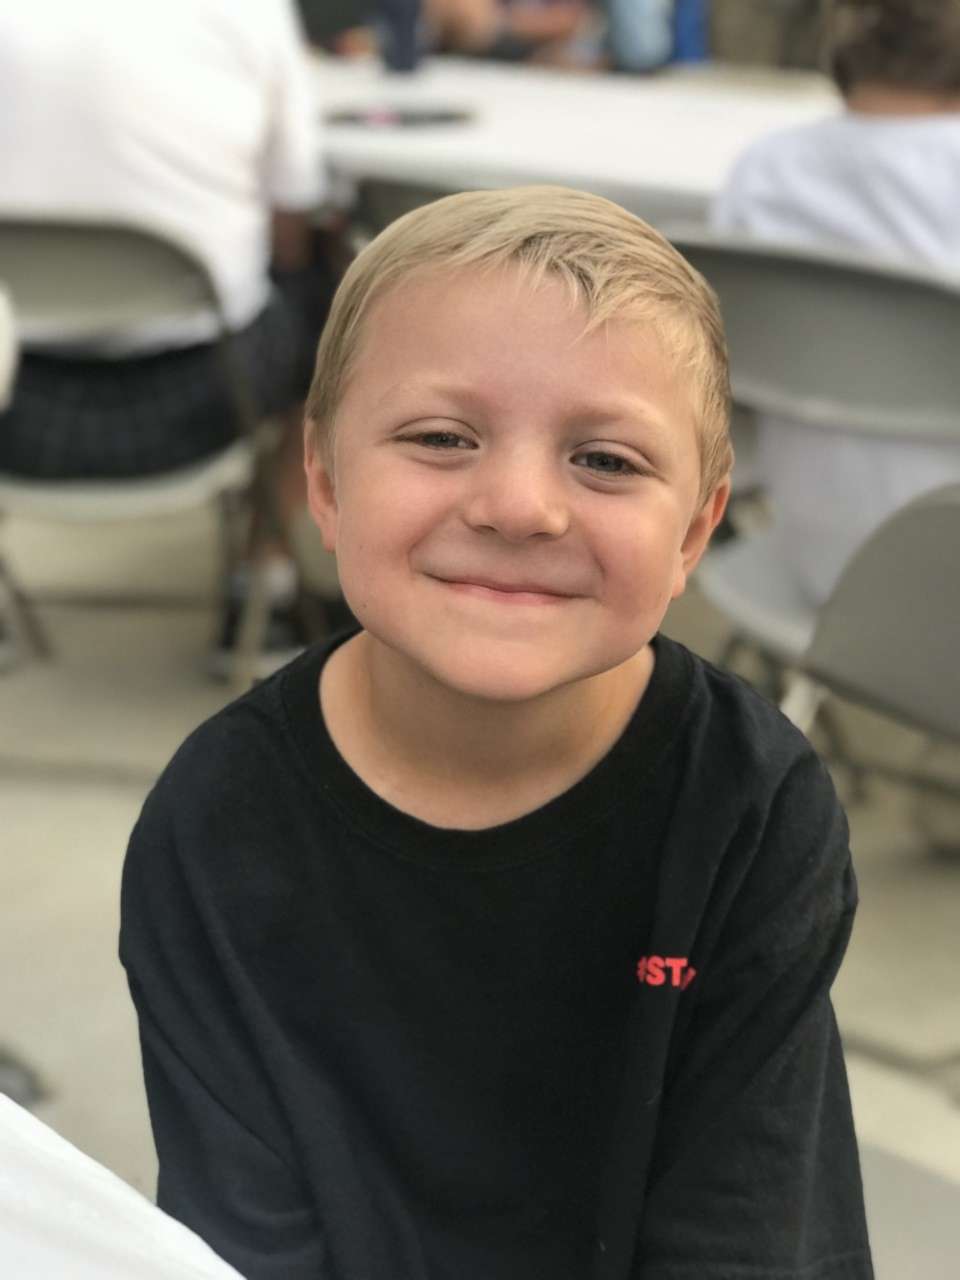 PHOTO: Titus, 5, from Kansas City, Mo., has been told he may not be able to receive the crucial cancer drug vincristine at his scheduled appointment next week, believed to be able to help cure his cancer, because of a shortage.